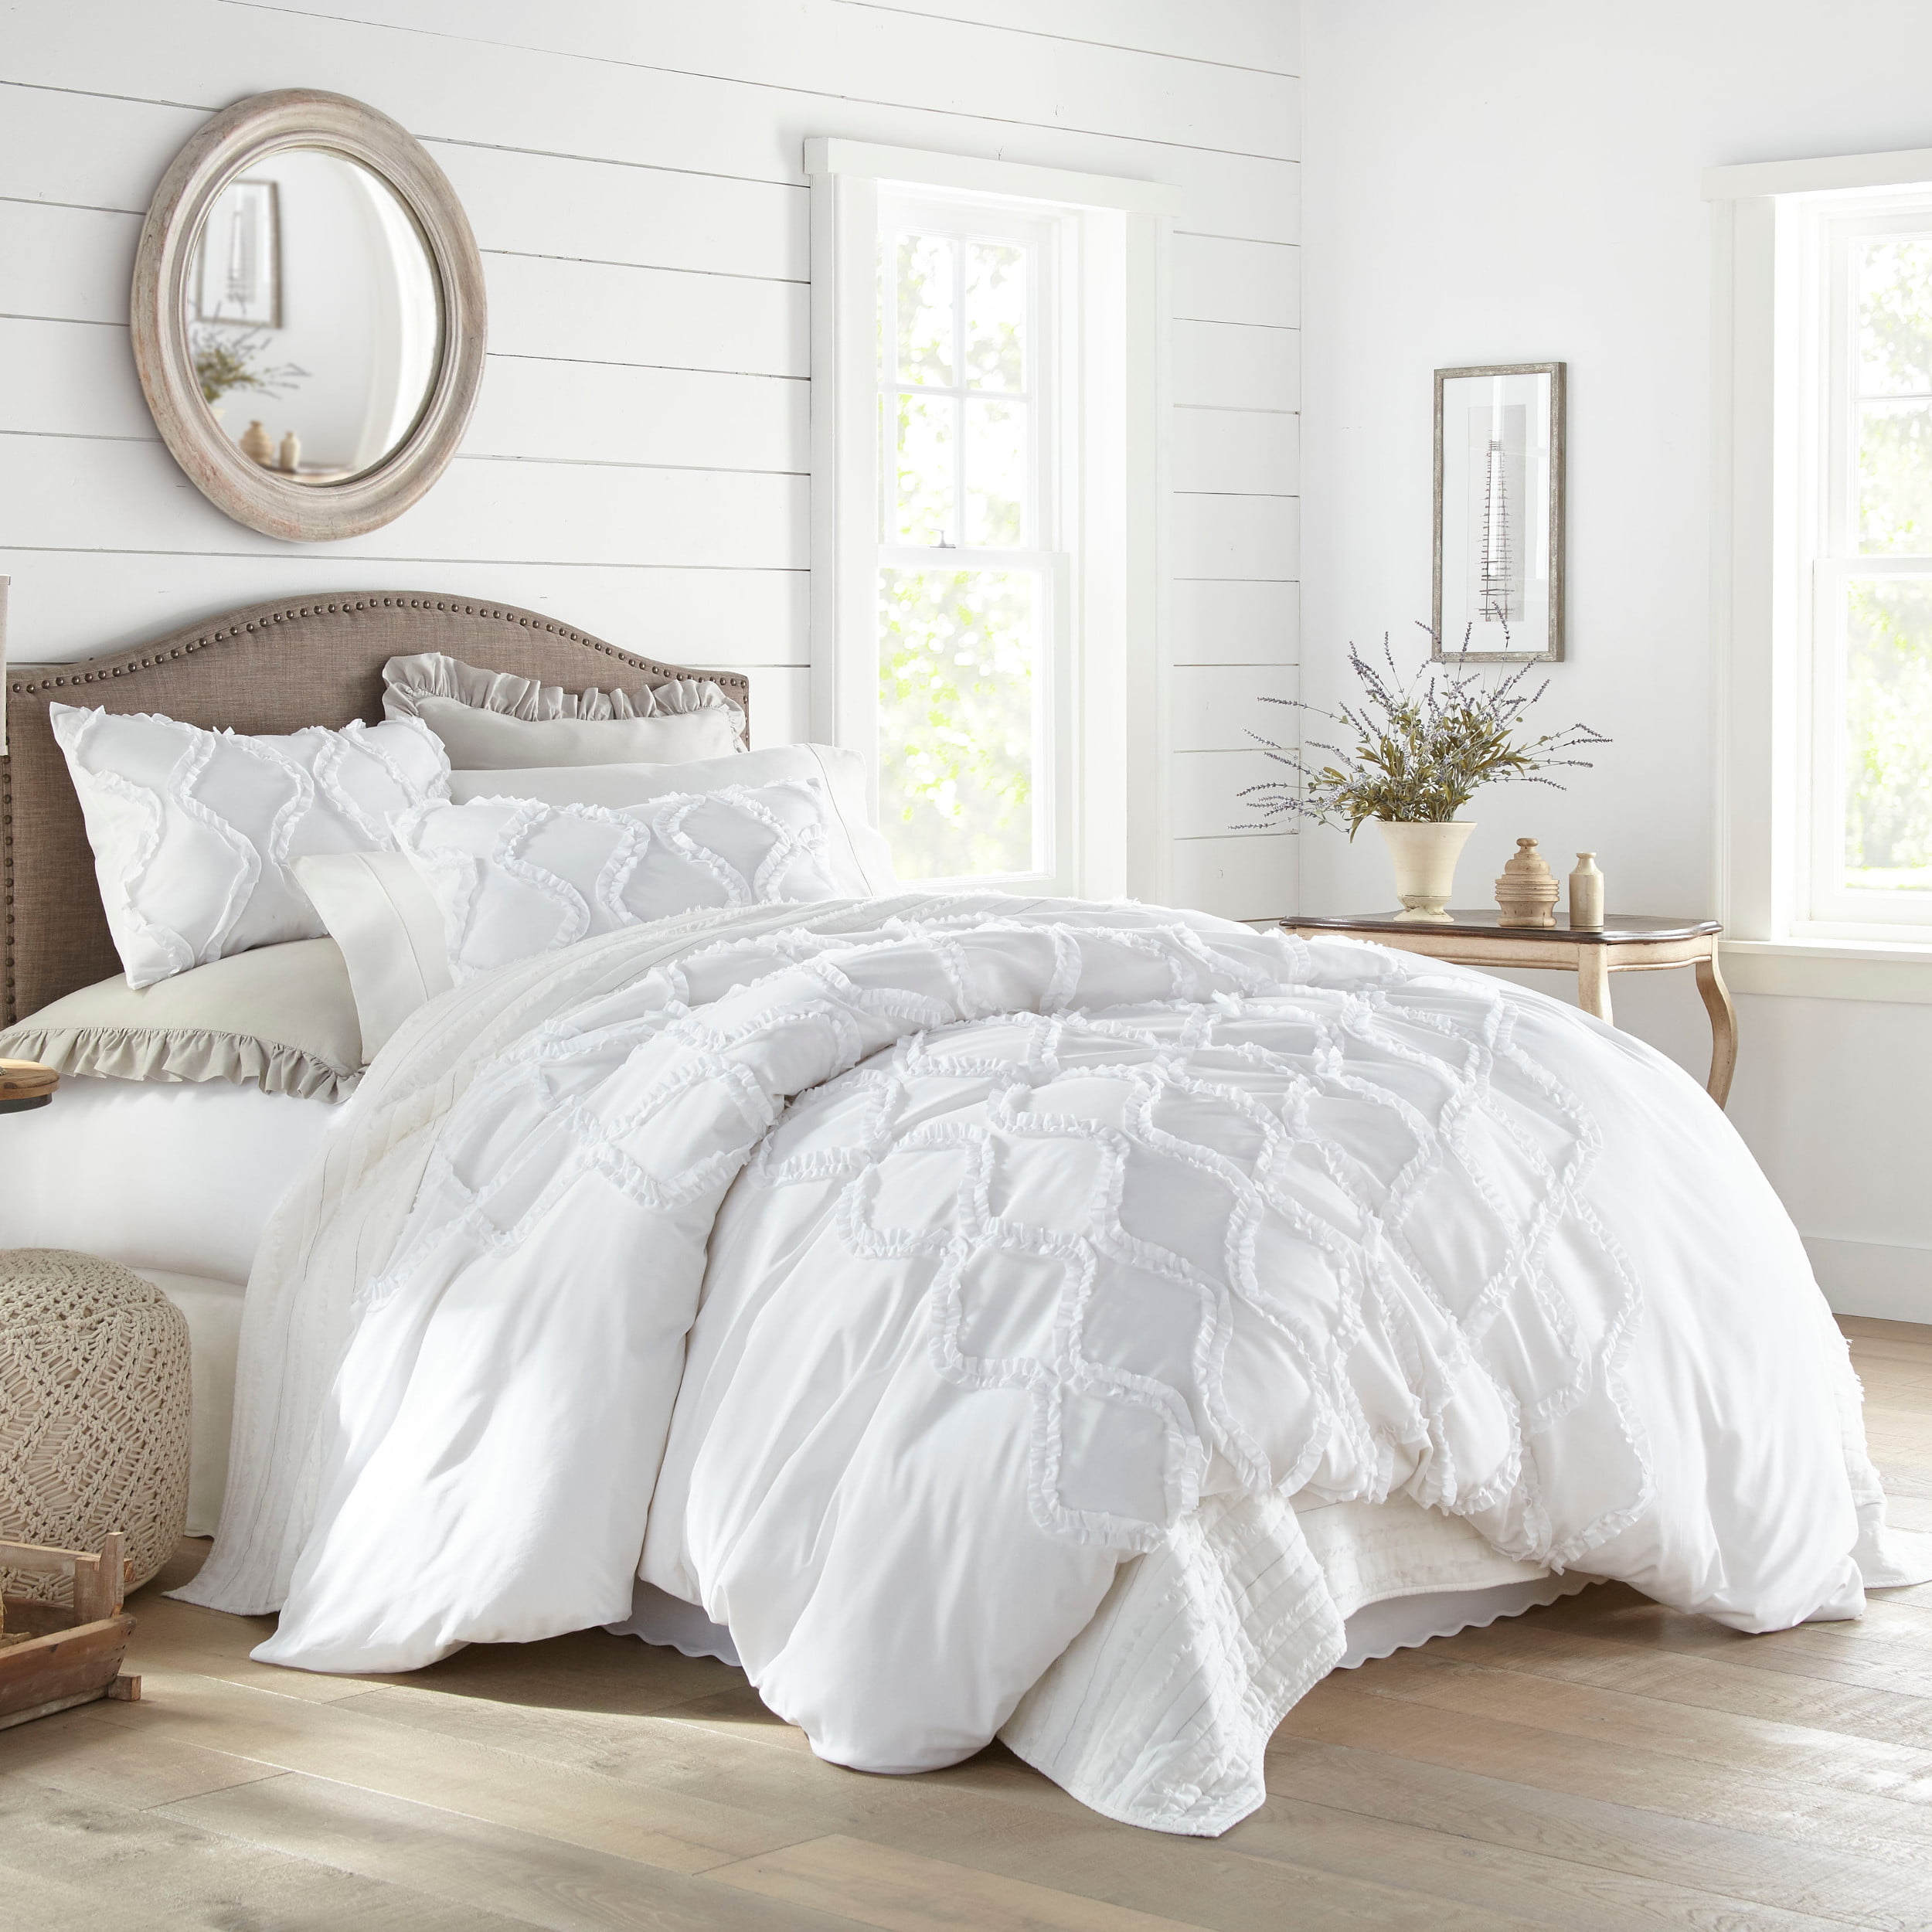 Stone Cottage Anne Ruffle Ogee White, White Ruffle Duvet Cover Queen